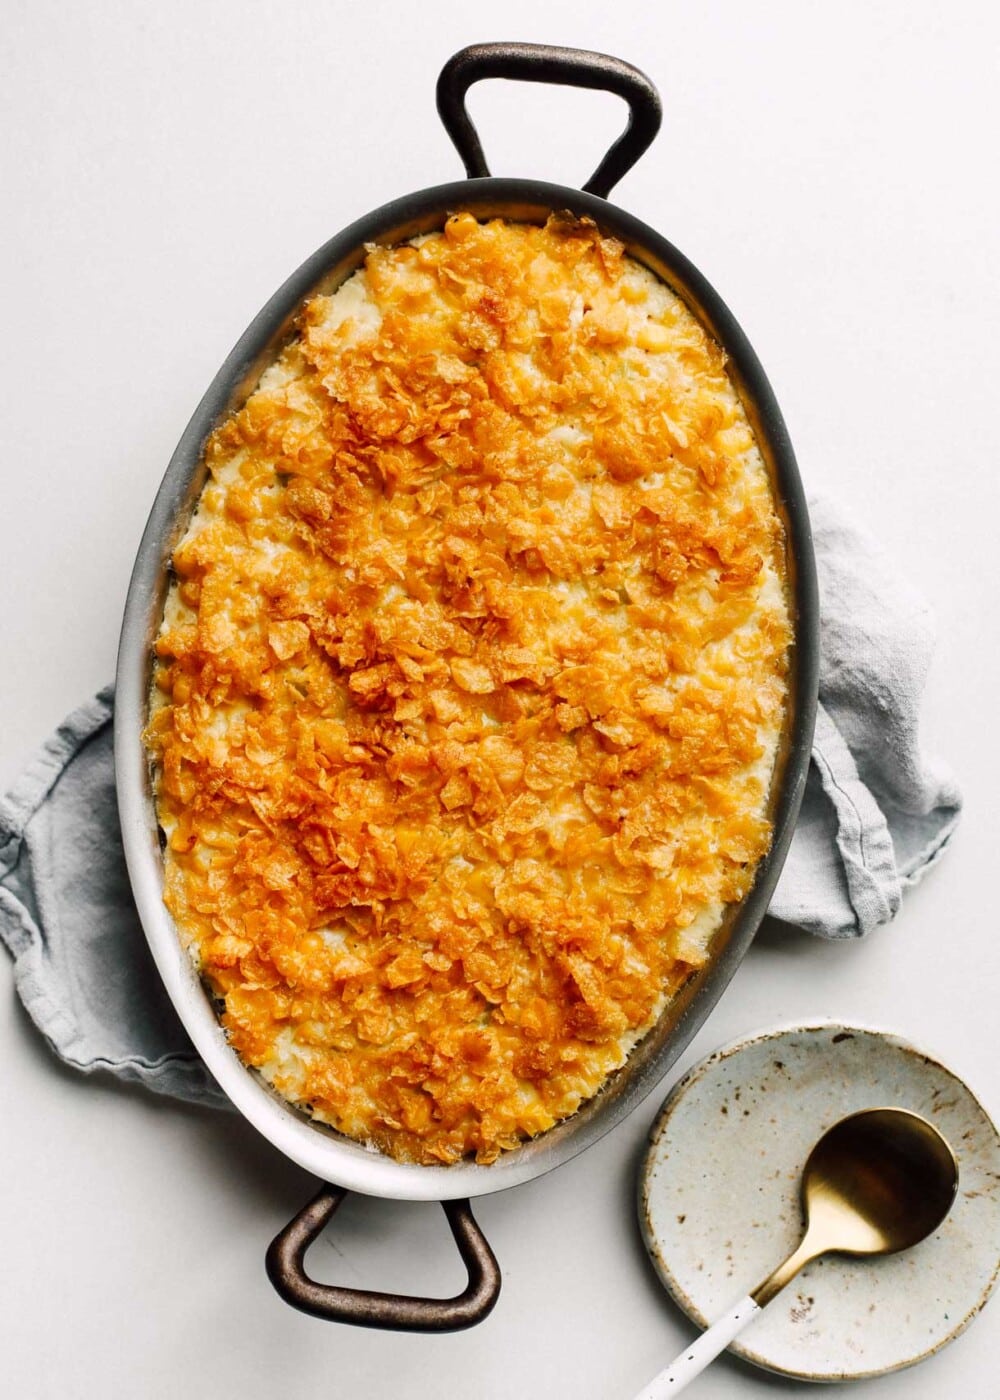 creamy baked corn in a casserole dish with gold spoon on the right side